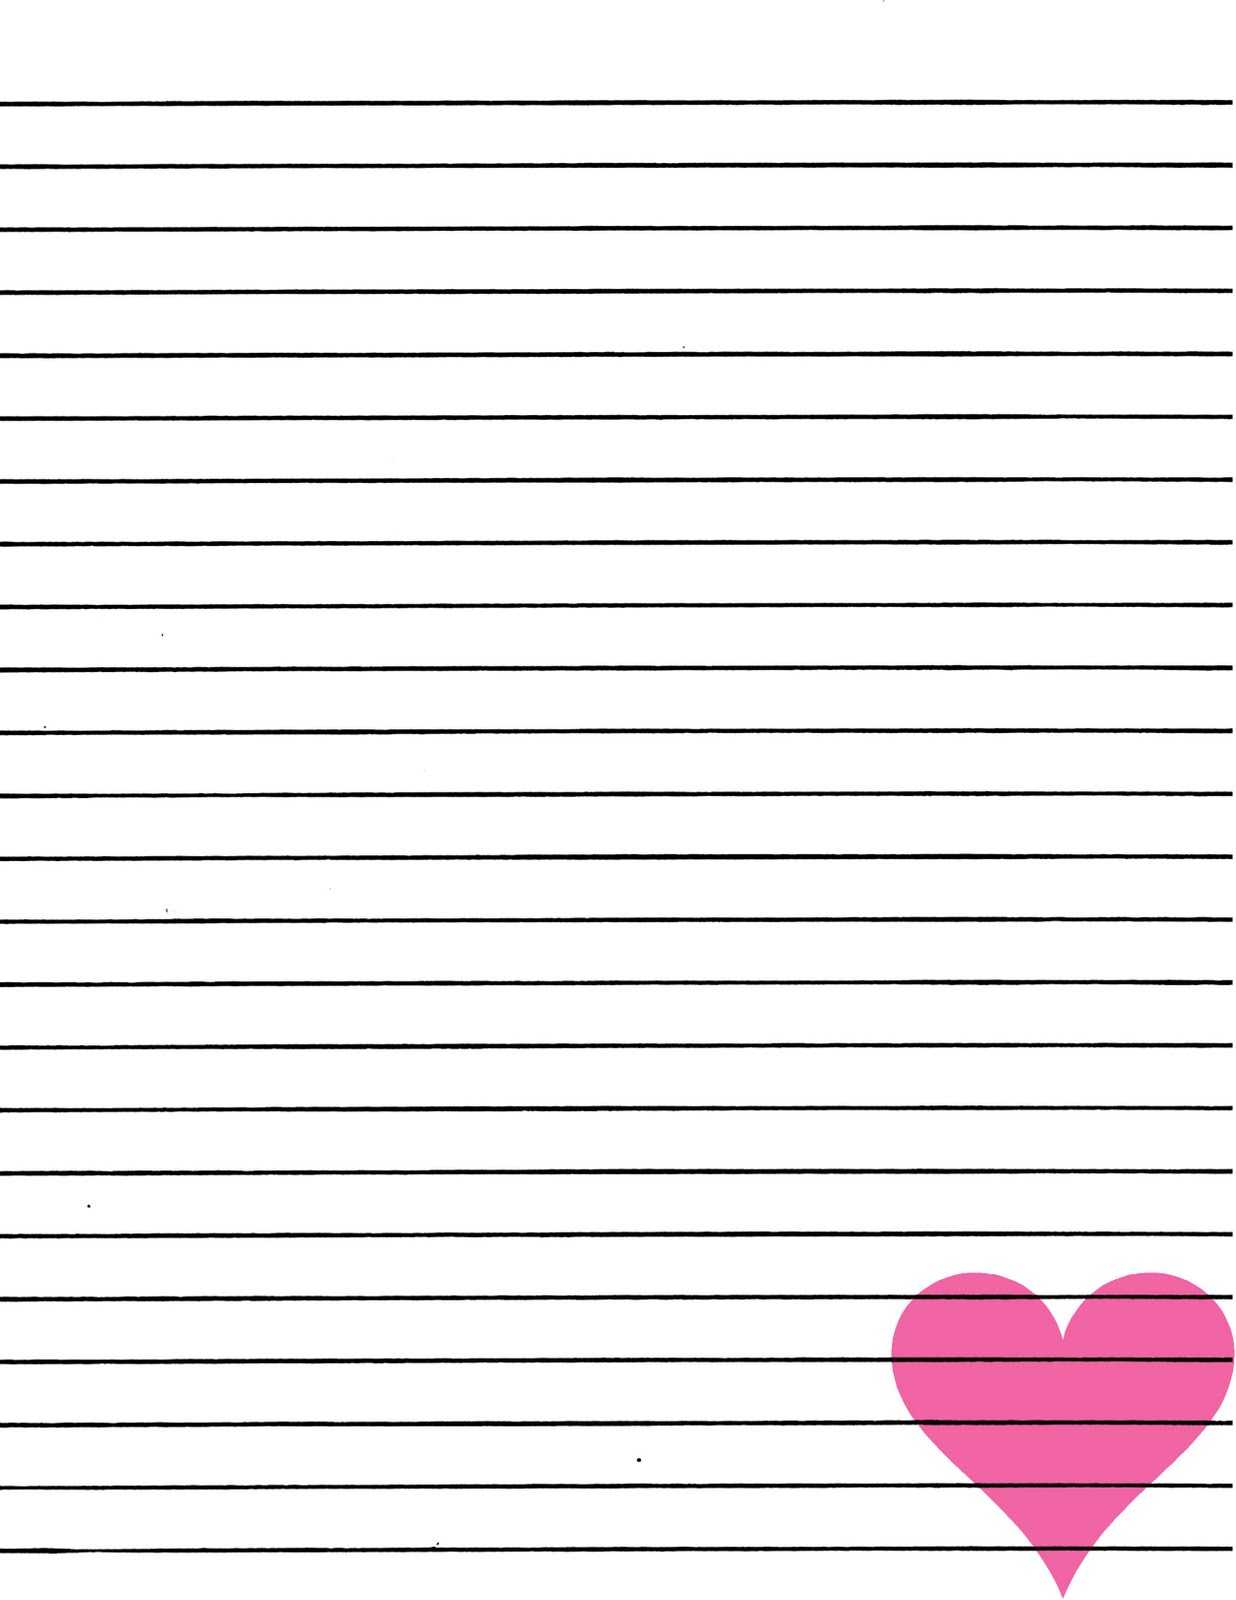 Blank Lined Paper Template – Karan.ald2014 With College Ruled Lined Paper Template Word 2007